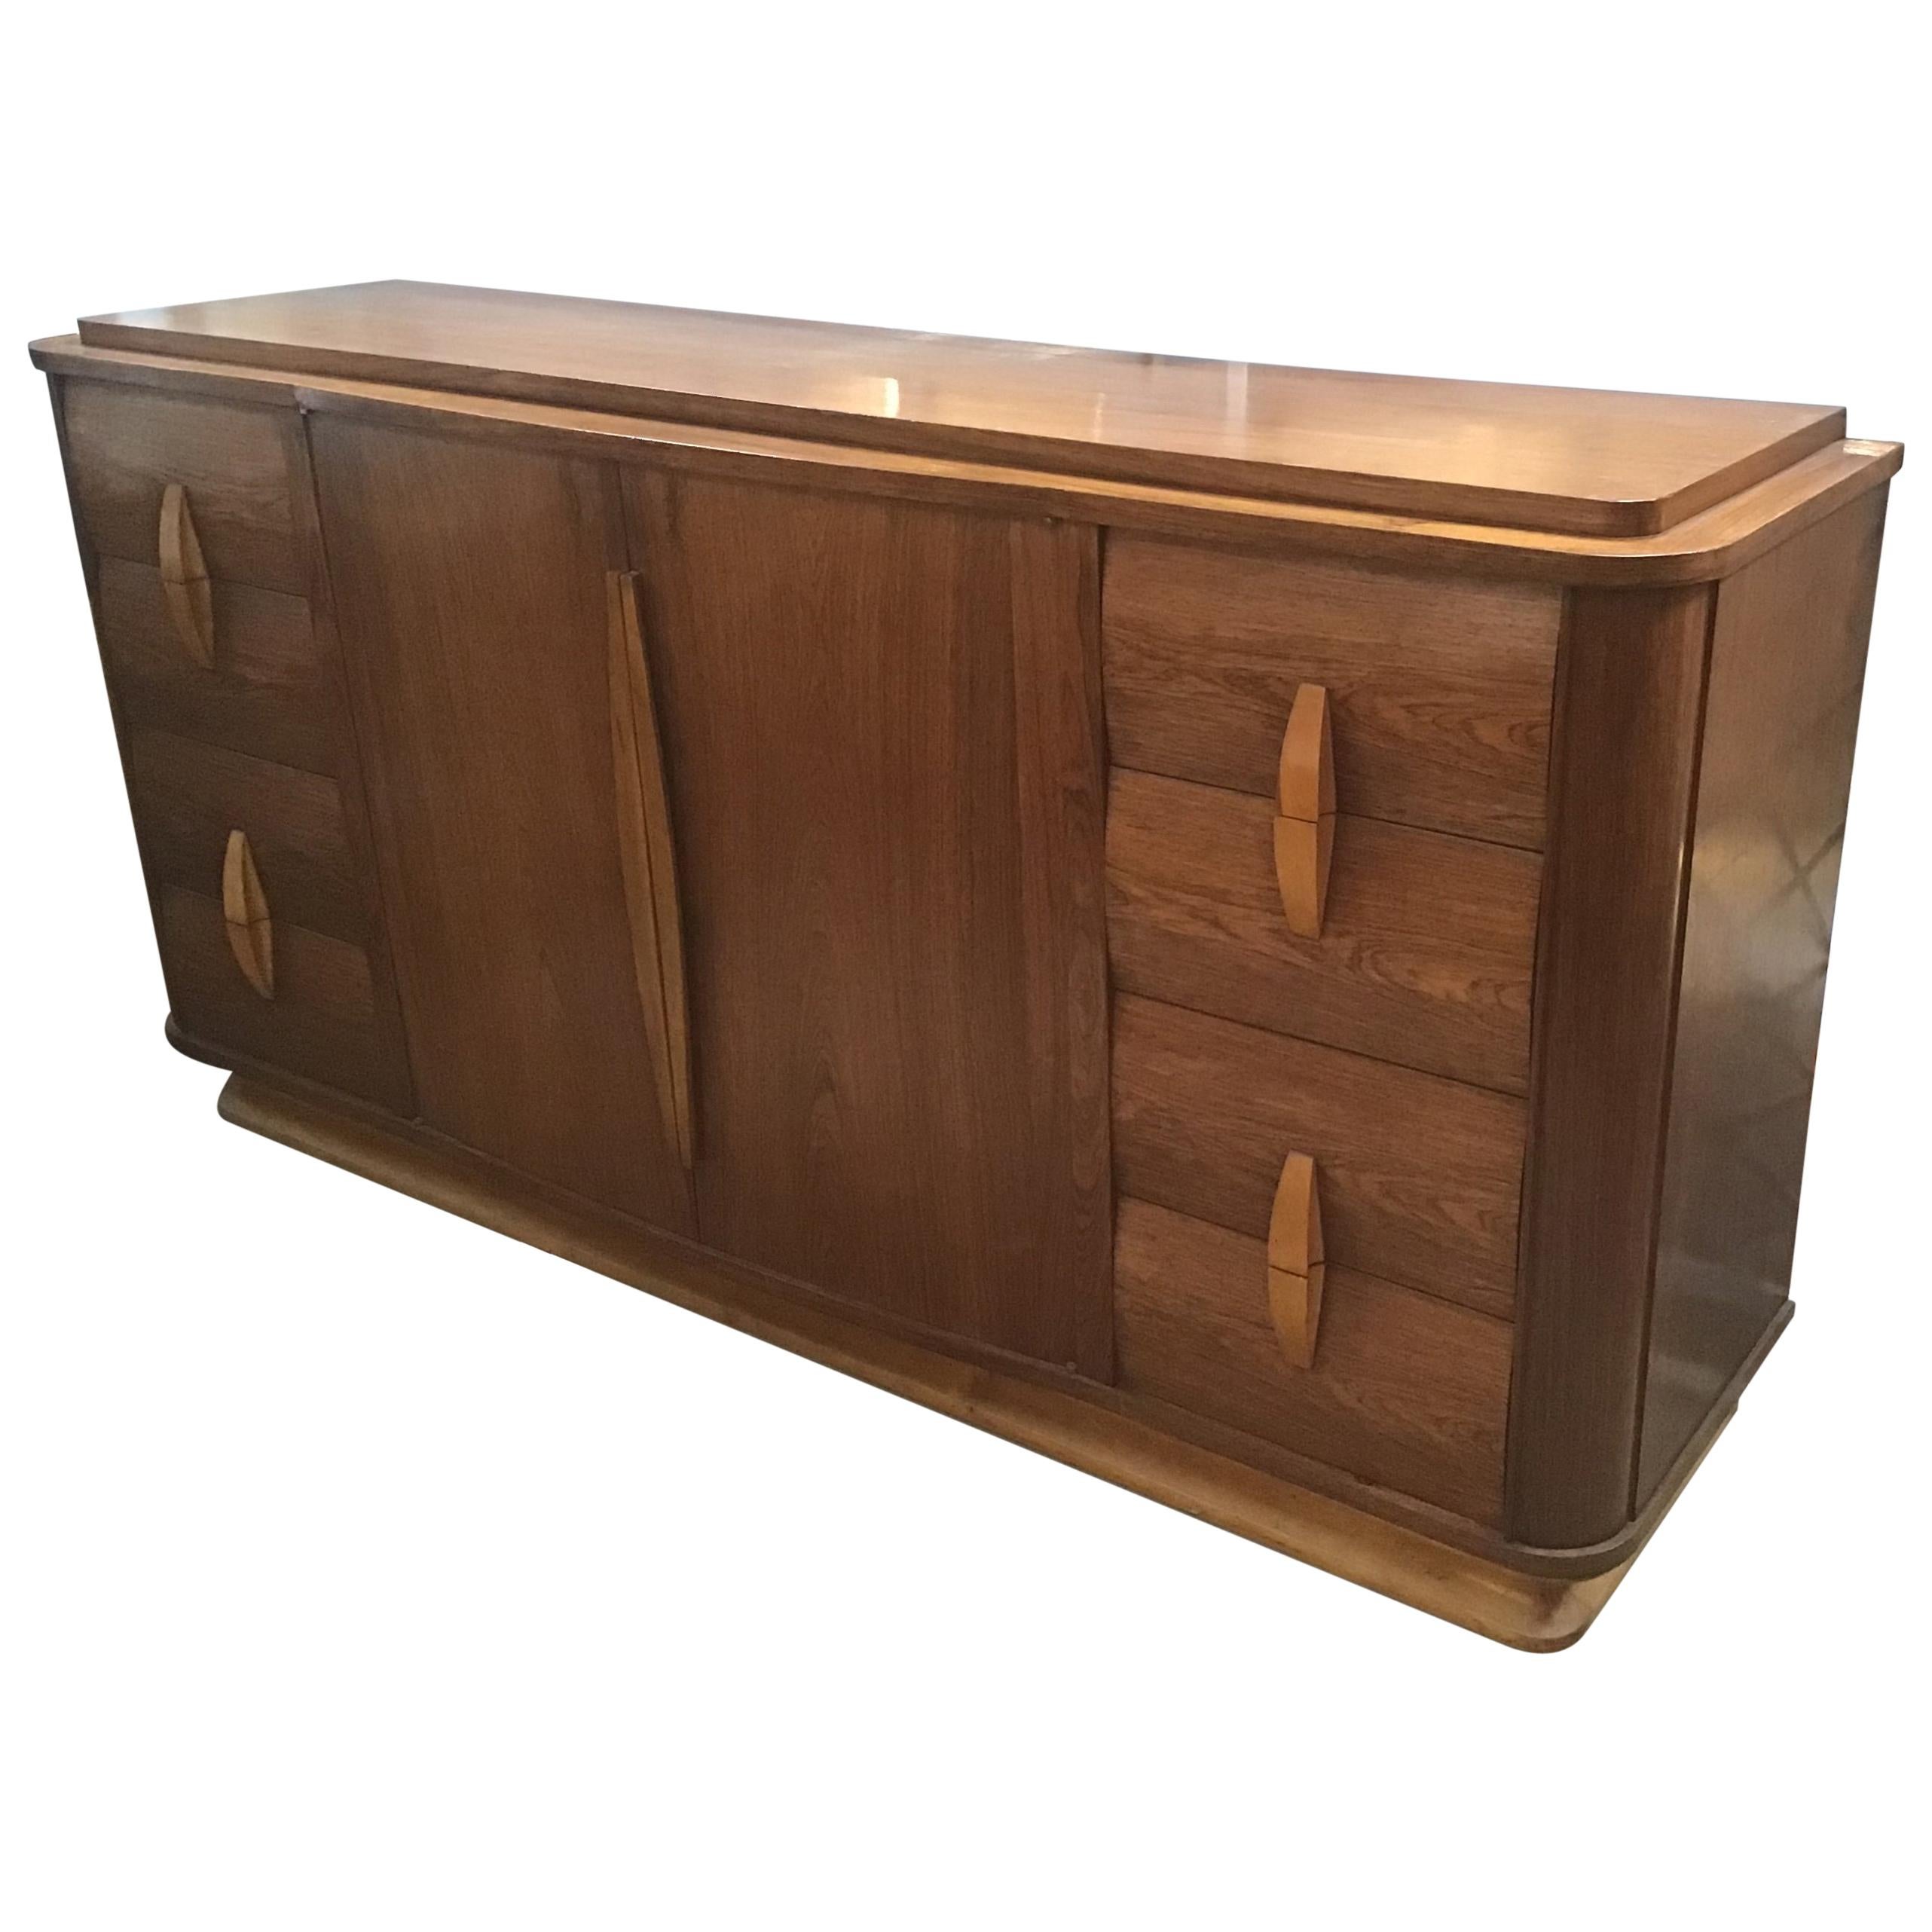 20th Century Italian Art Deco Teak Wood Cupboard with Drawers and Shutters For Sale